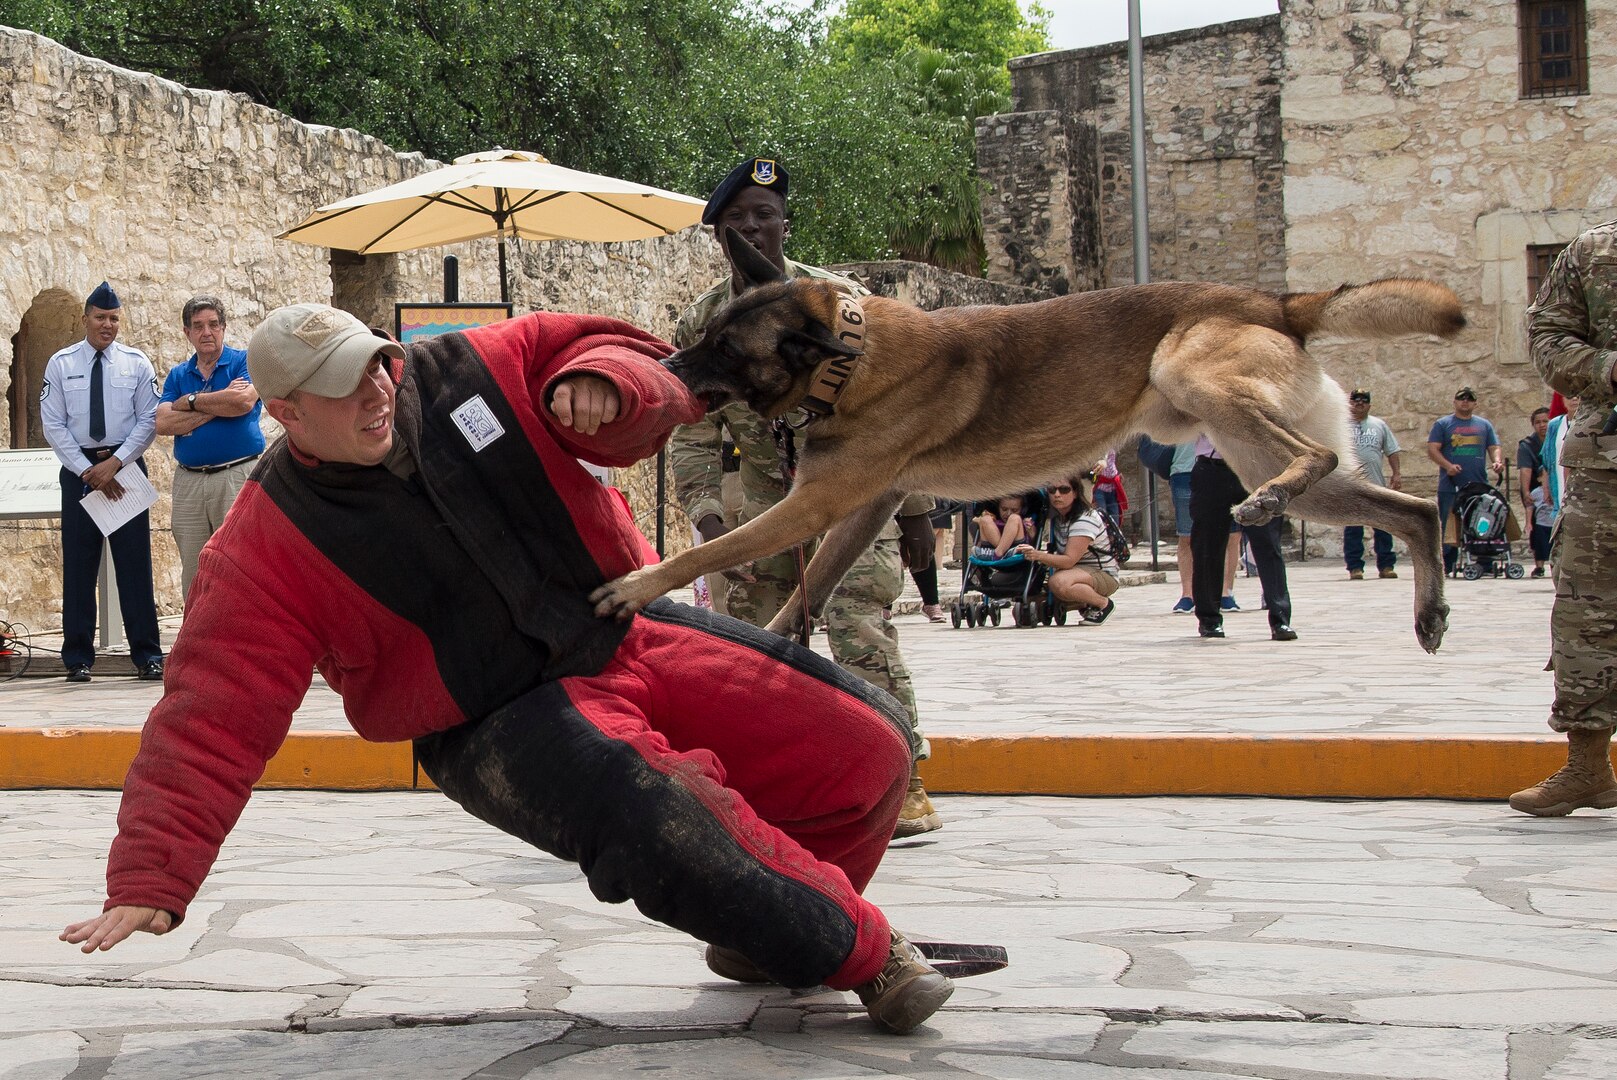 Members of the 802nd Security Force Squadron military working dog handlers, demonstrate MWD obedience, detection and patrol skills during San Antonio’s Fiesta Air Force Day at the Alamo, April 22, 2019. From its beginning in 1891, Fiesta has grown into an annual celebration that includes civic and military observances, street and river parades, exhibits, pilgrimages and memorials.